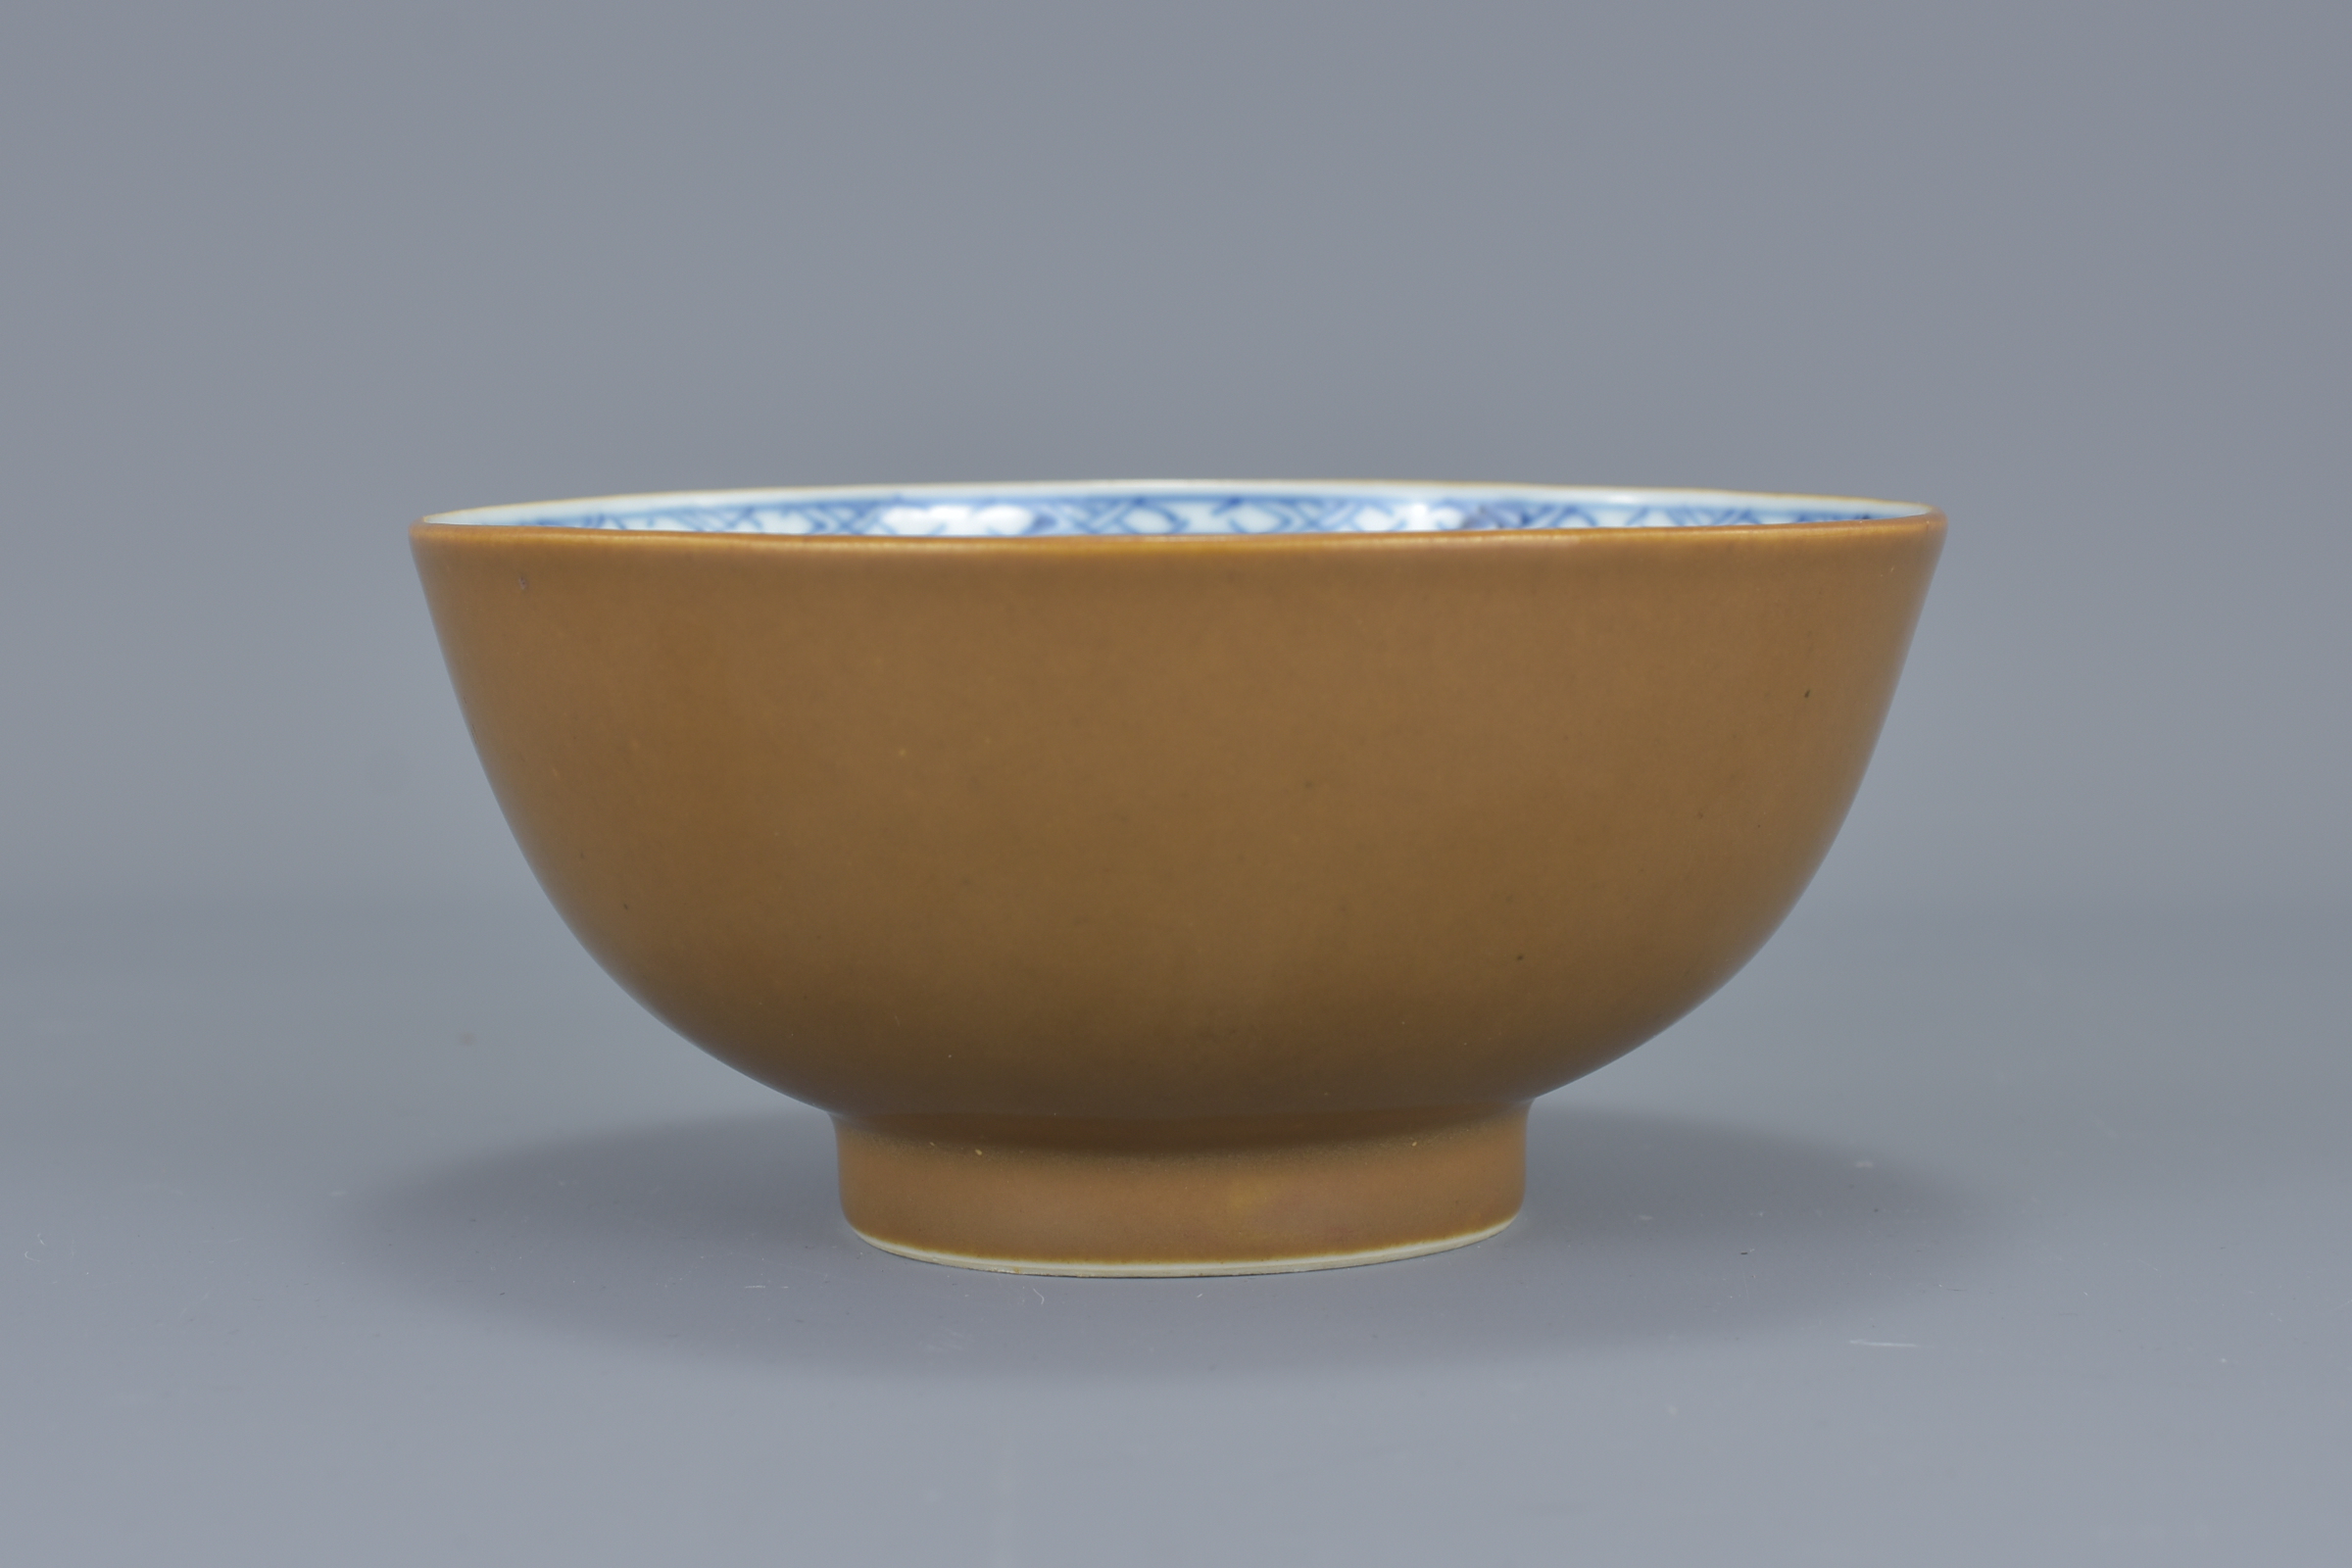 A Chinese 18th century tea-dust brown glazed export porcelain bowl with underglaze blue interior dep - Image 4 of 6